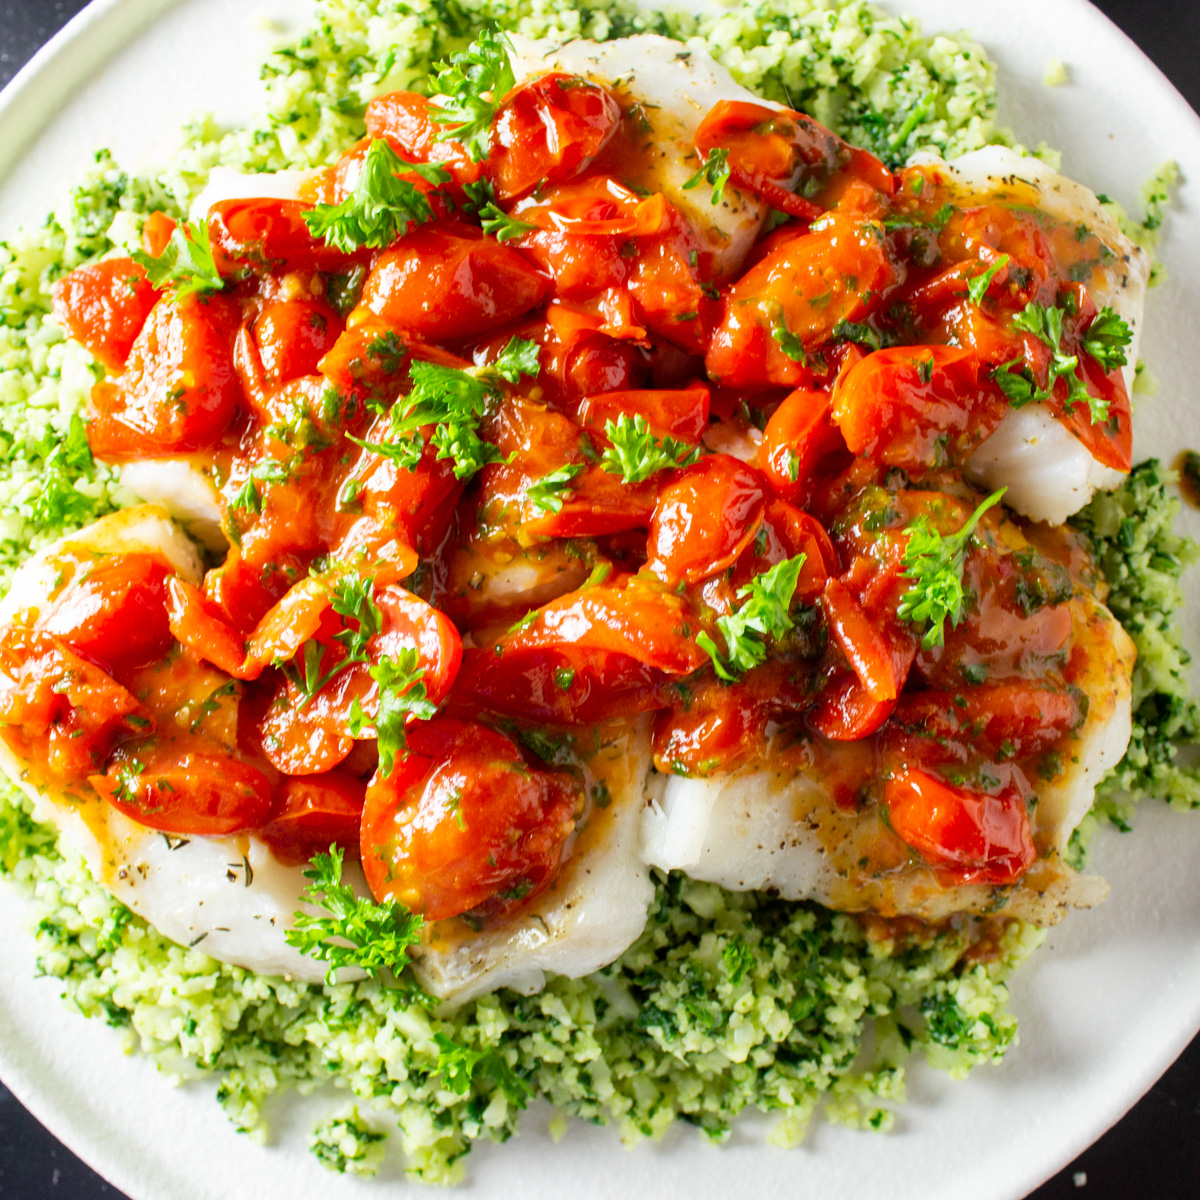 Baked Fish Fillets with Cherry Tomato Sauce